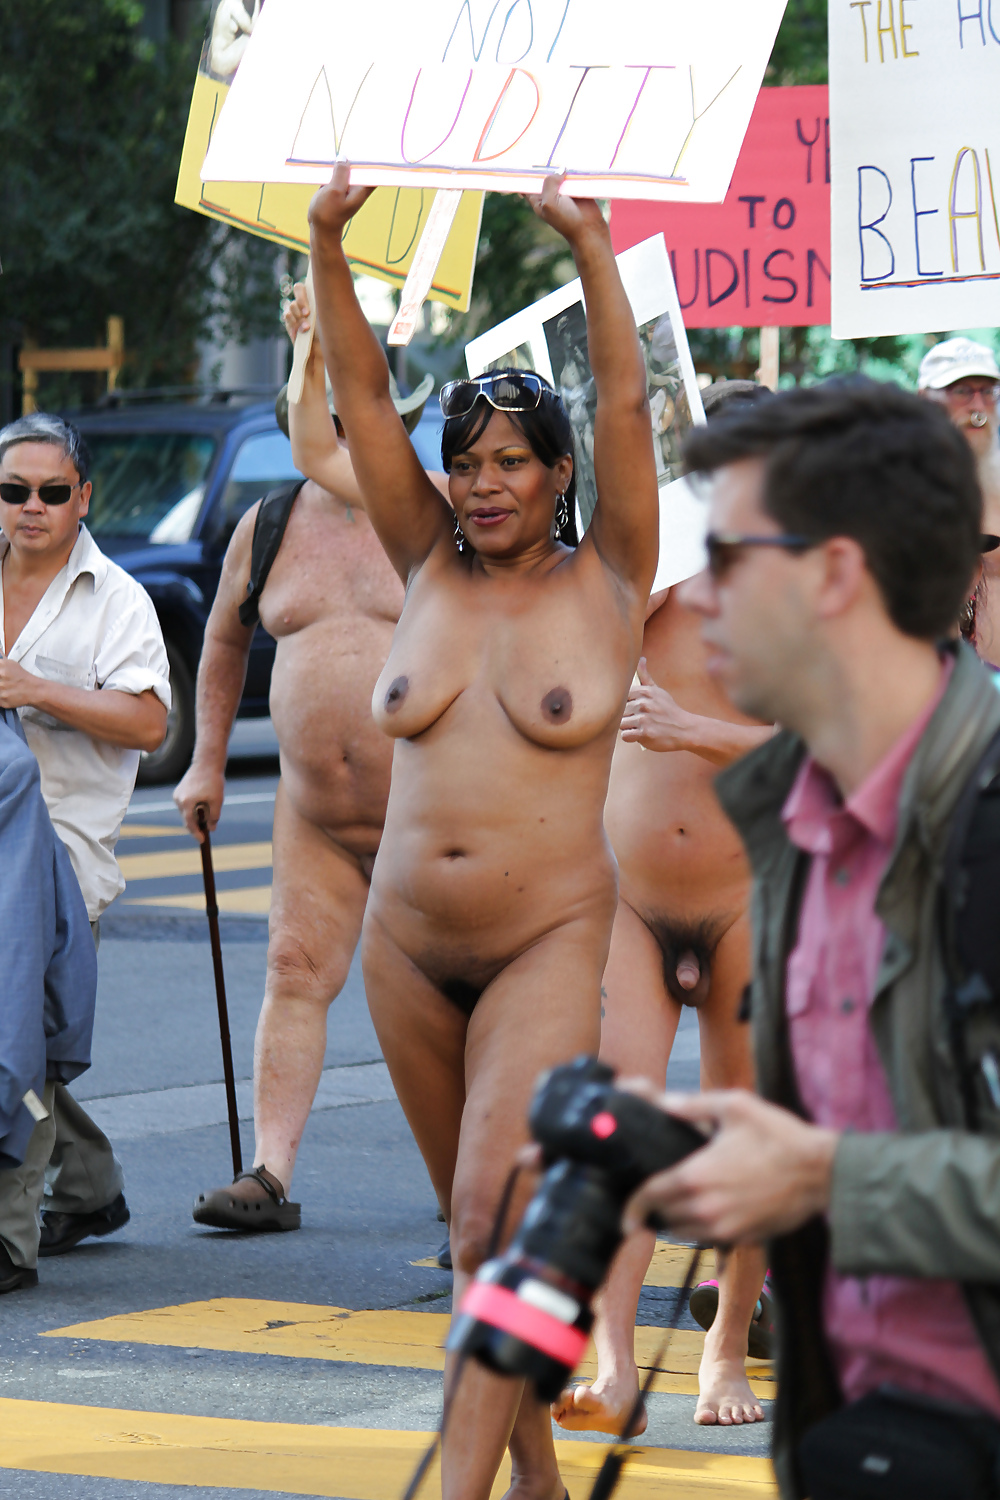 Black woman protesting naked in public. 